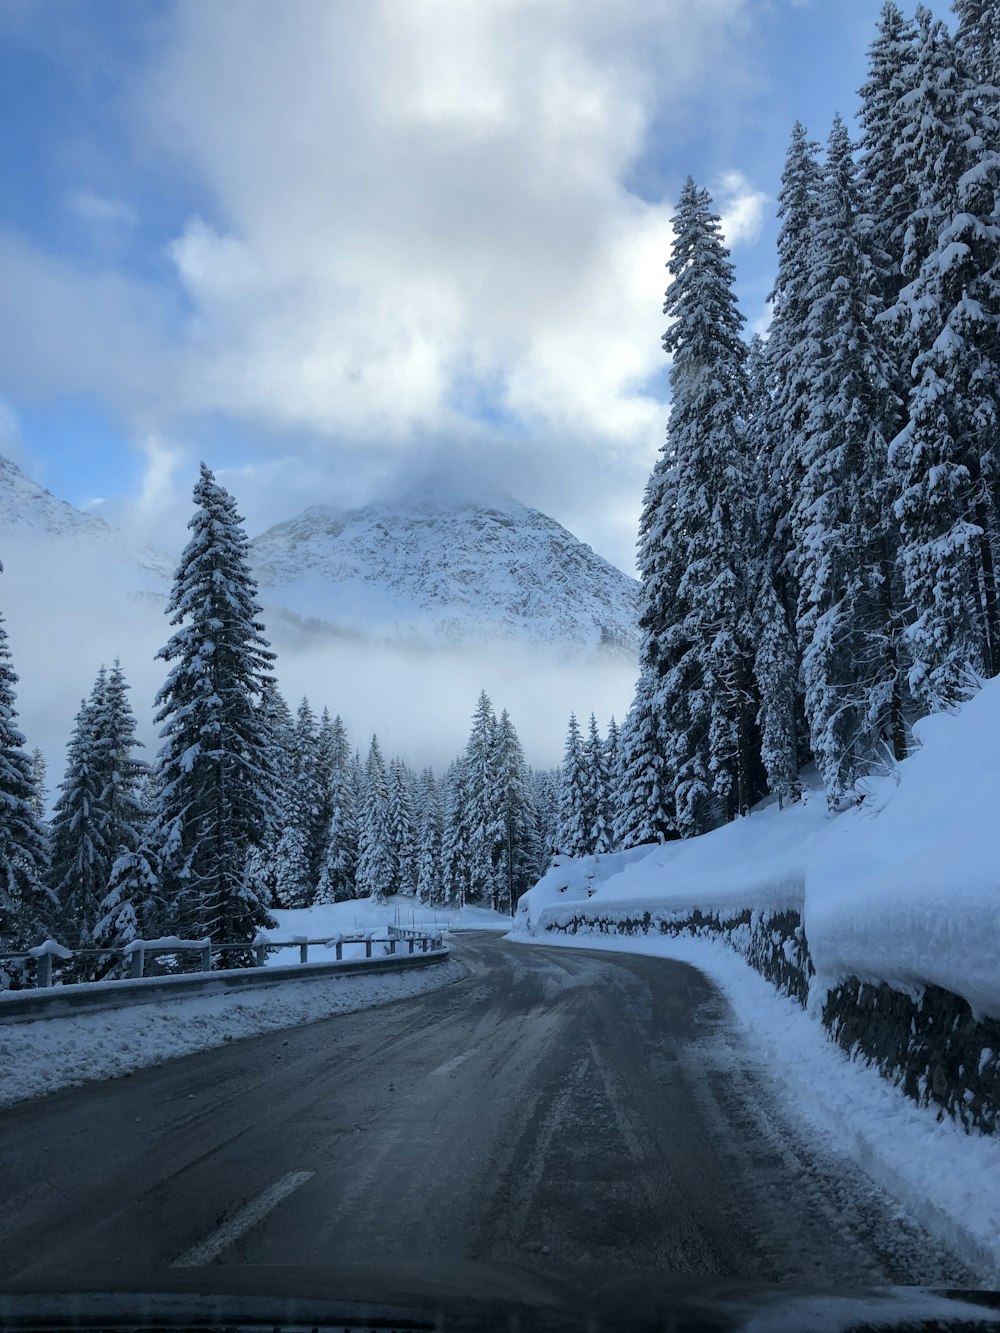 asphalt road beside snowy trees and mountain